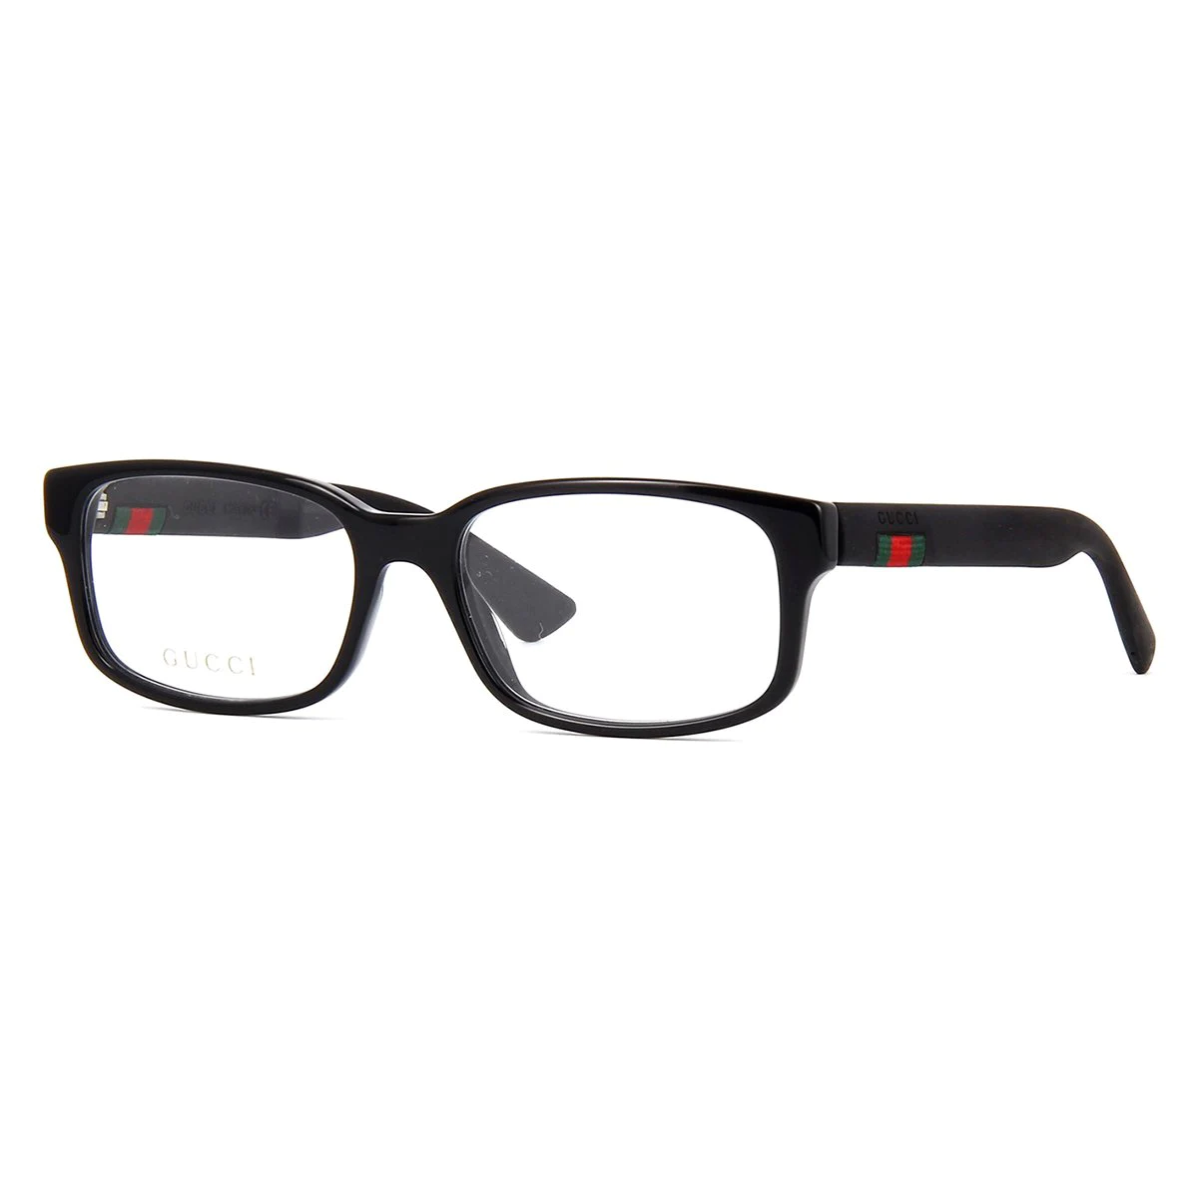 "Trendy Gucci Eyewear - Explore the Fashion-forward Gucci 0012O Spectacle Frame for Men."